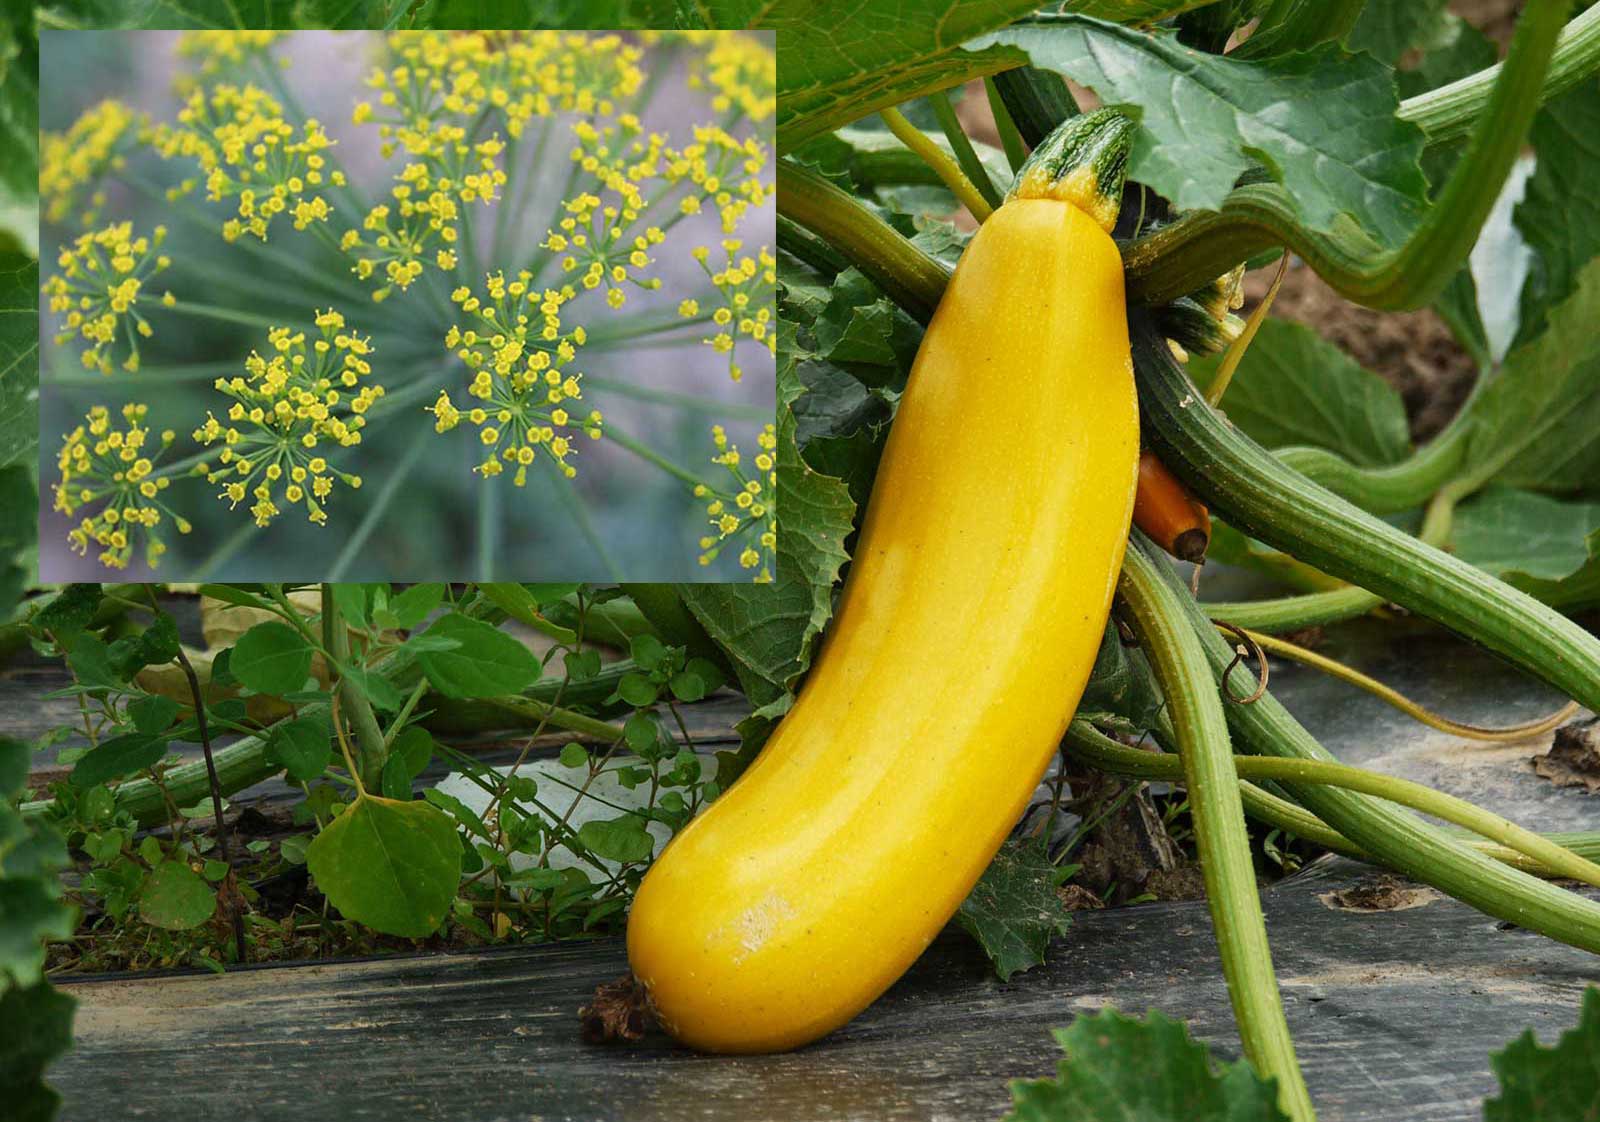 Melons or Squash and Flowering Herbs - Companion Plantings